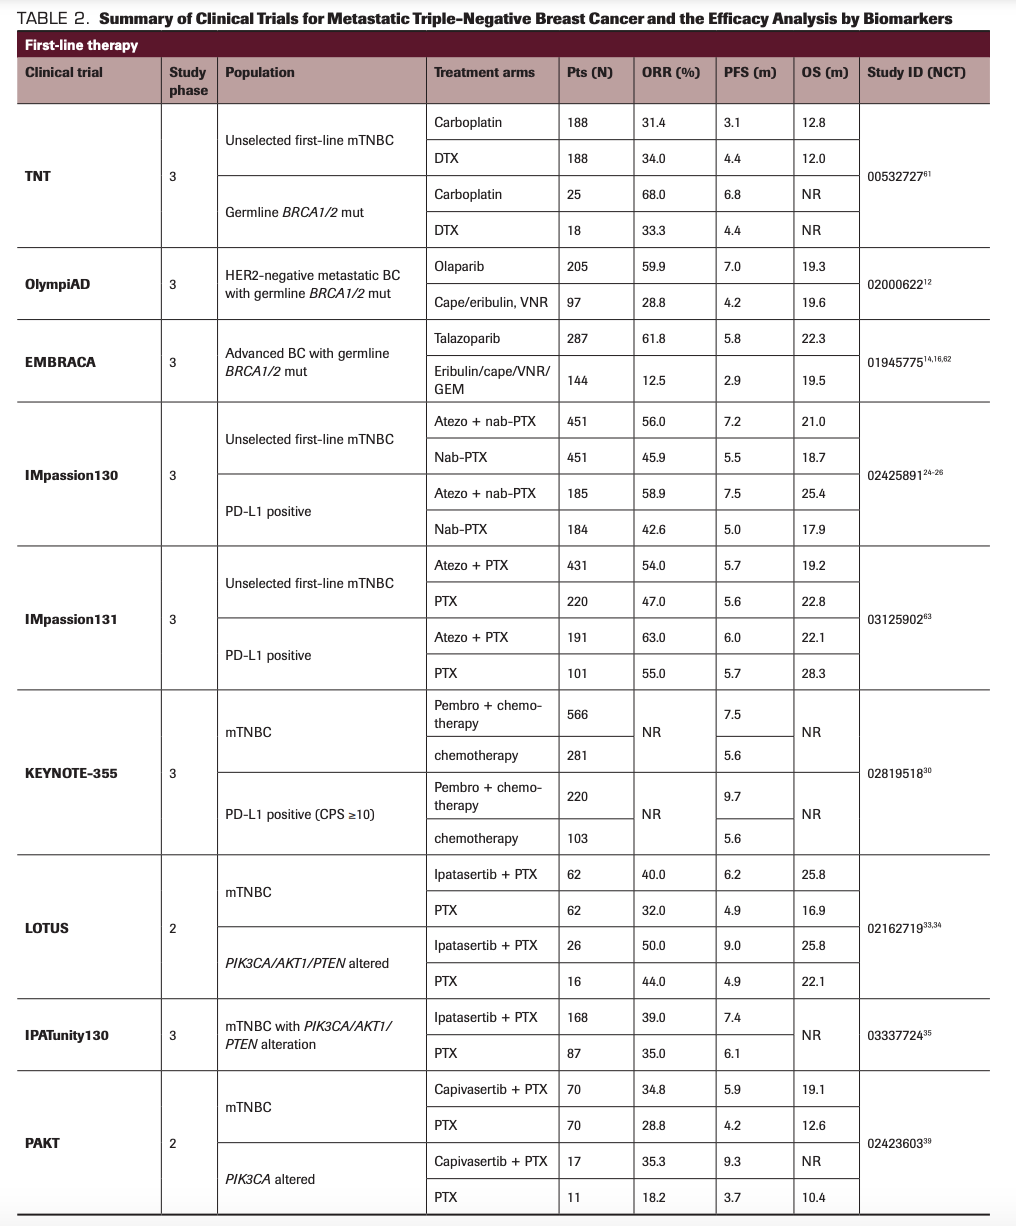 TABLE 2. Summary of Clinical Trials for Metastatic Triple-Negative Breast Cancer and the Efficacy Analysis by Biomarkers